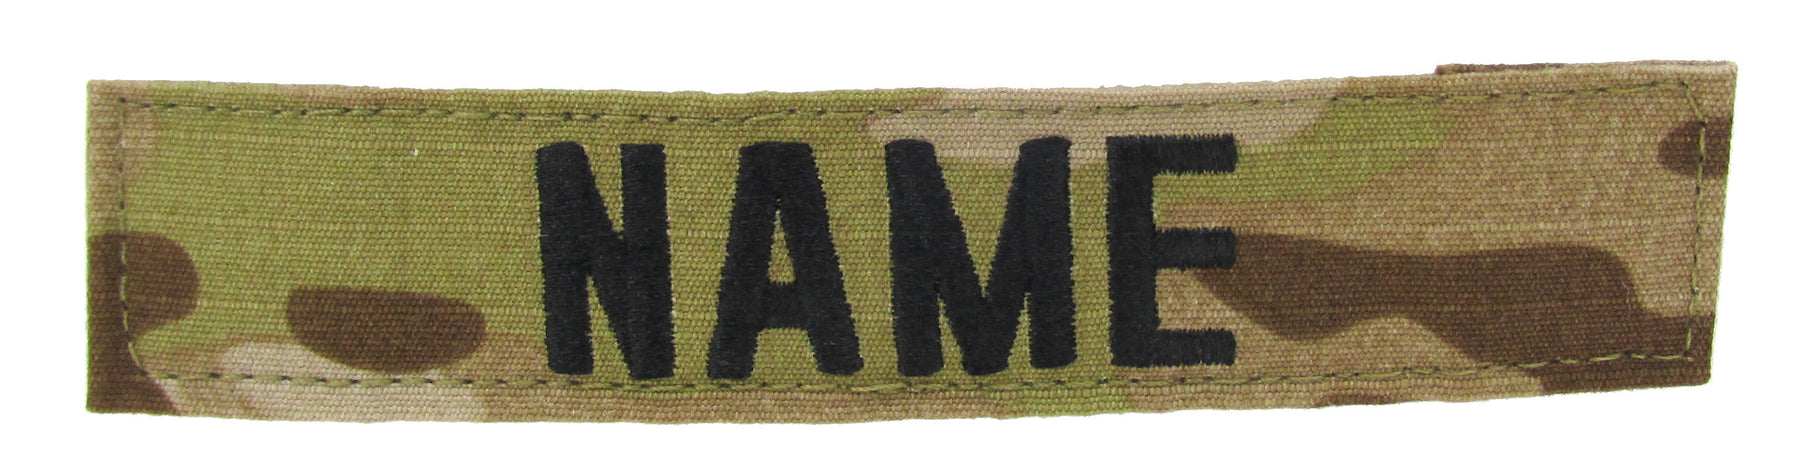 Multicam Arid Name Tape with Hook Fastener - Fabric Material